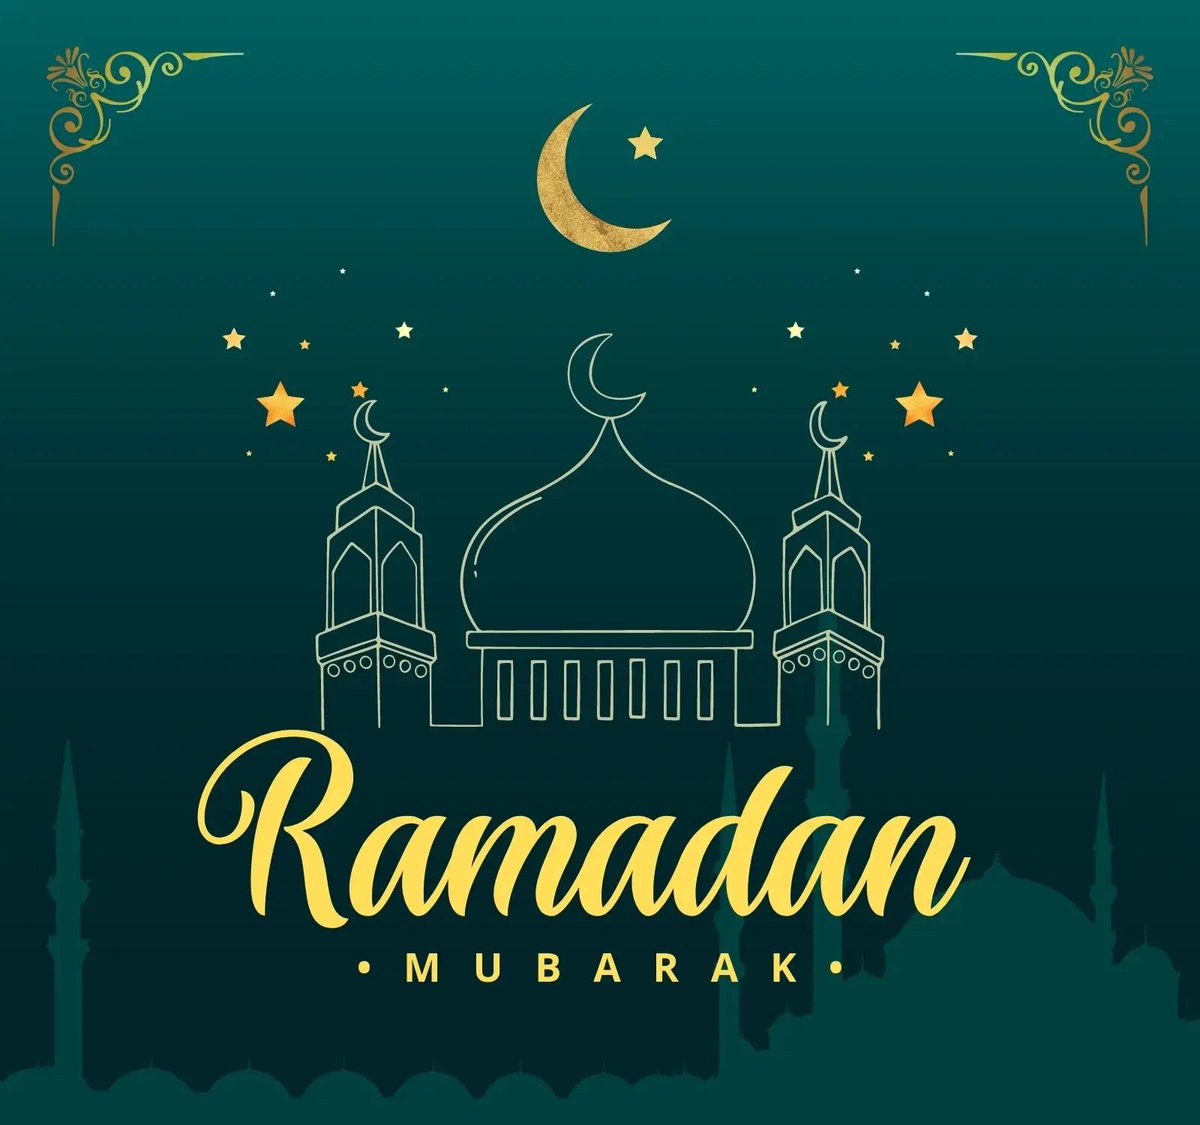 Ramadan Mubarak to all our players and supporters💙